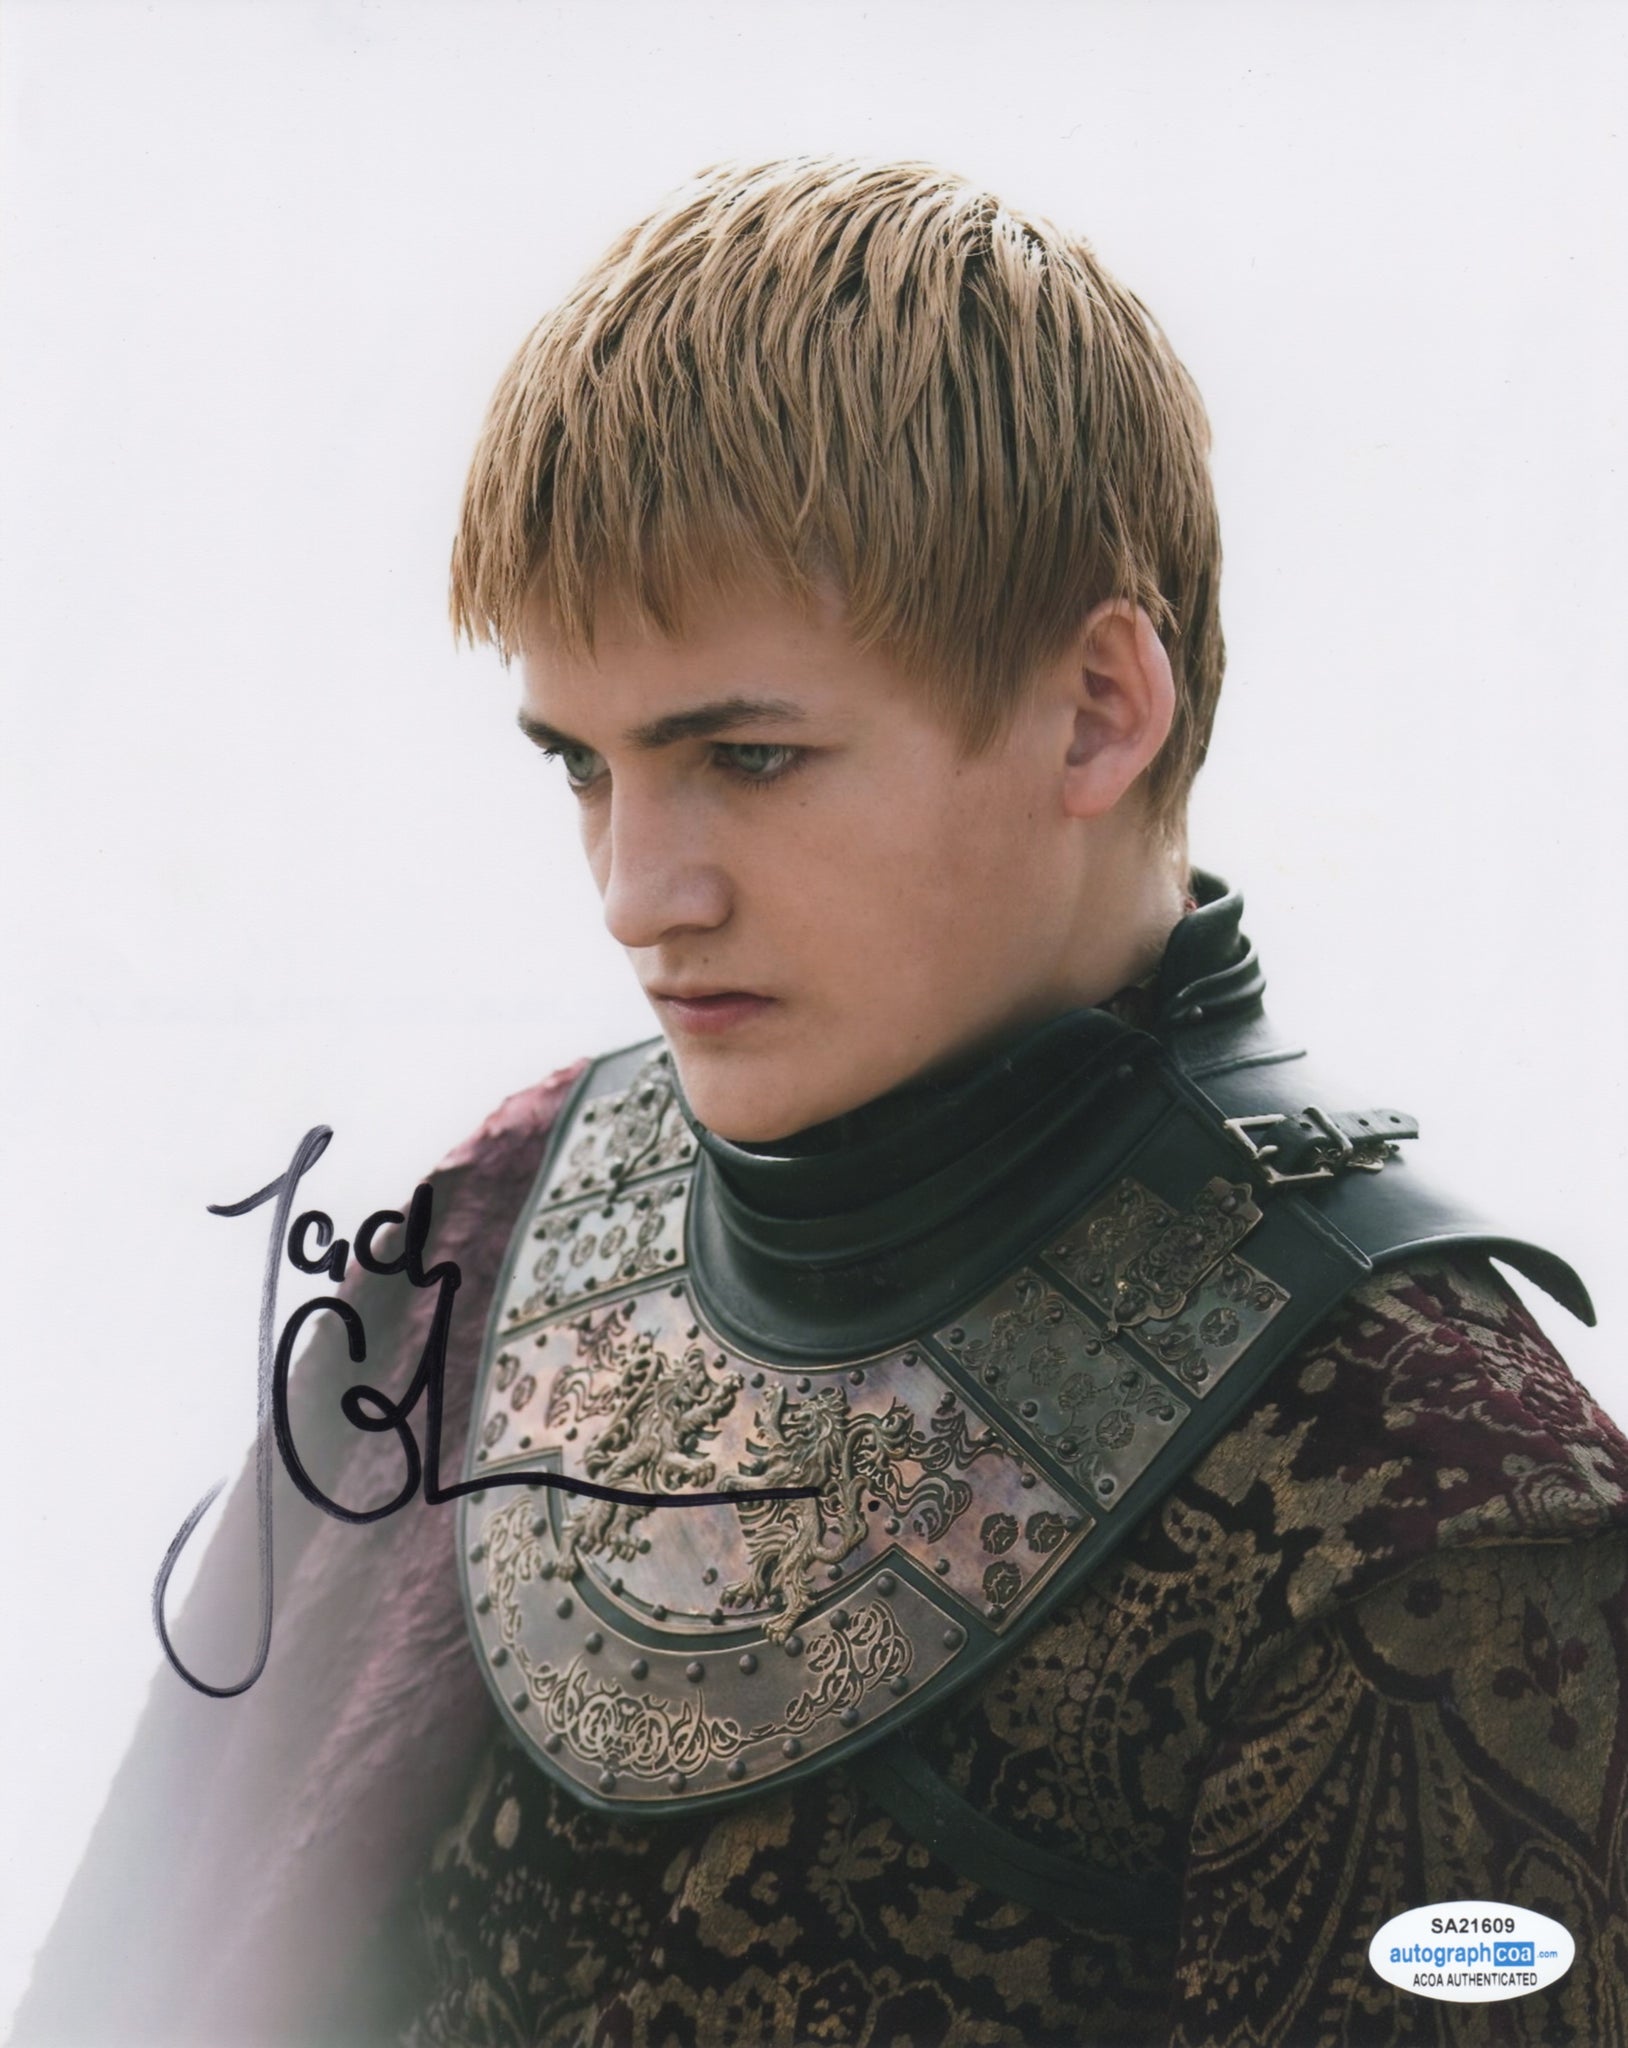 Jack Gleeson Game of Thrones Signed Autograph 8x10 Photo ACOA #7 - Outlaw Hobbies Authentic Autographs